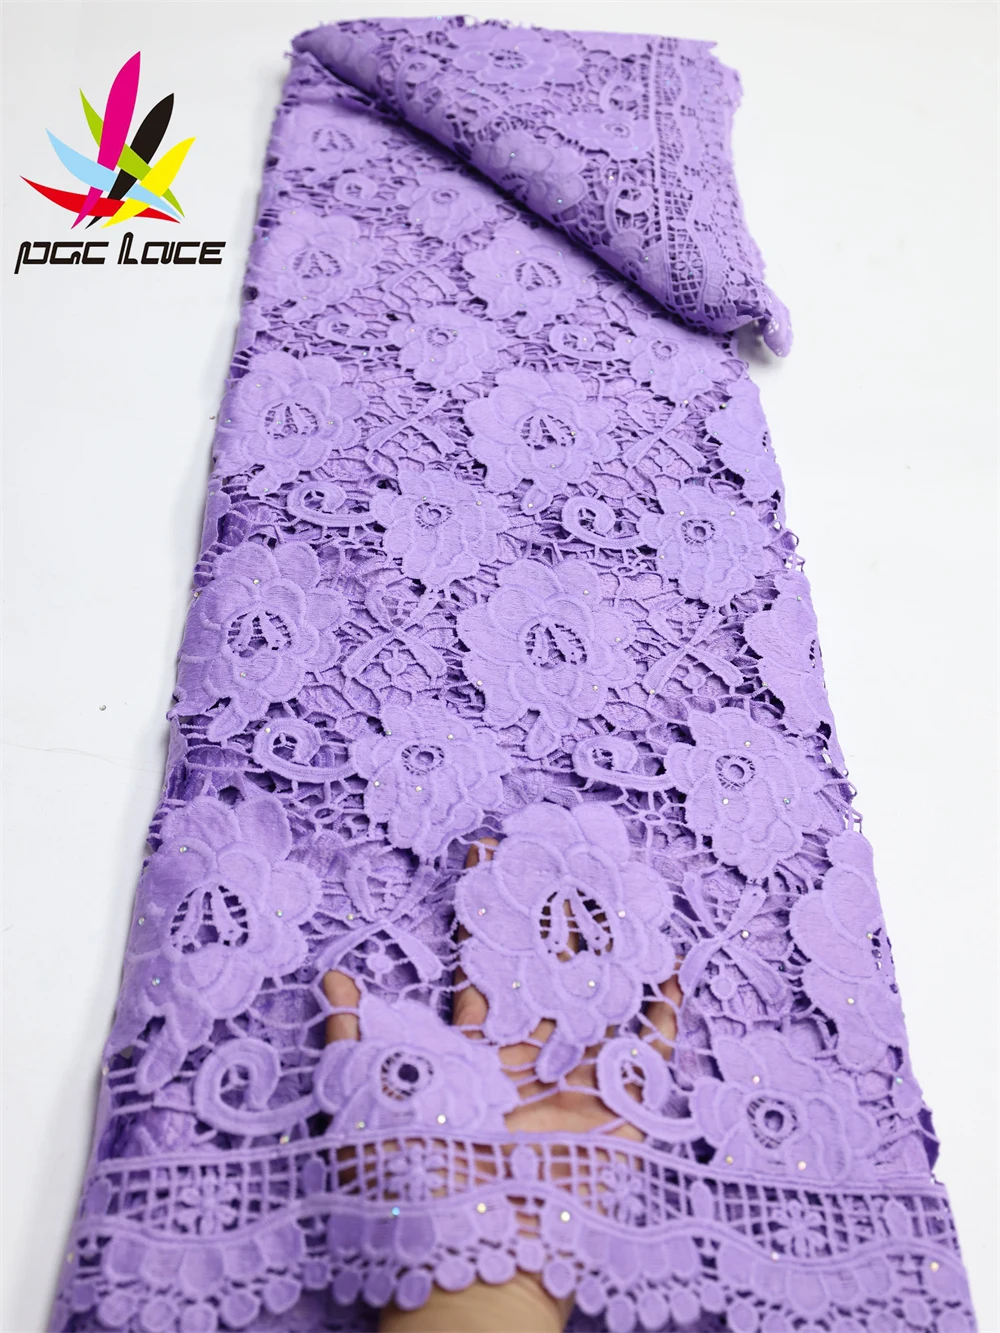 PGC African Cord Guipure  Lace Fabric 2023 High Quality Lace Nigerian French Milk Silk Lace Fabric For Wedding Dress pgc african guipure lace fabric 2021 high quality lace nigerian french milk silk lace fabric for wedding dress sewing ly124 1